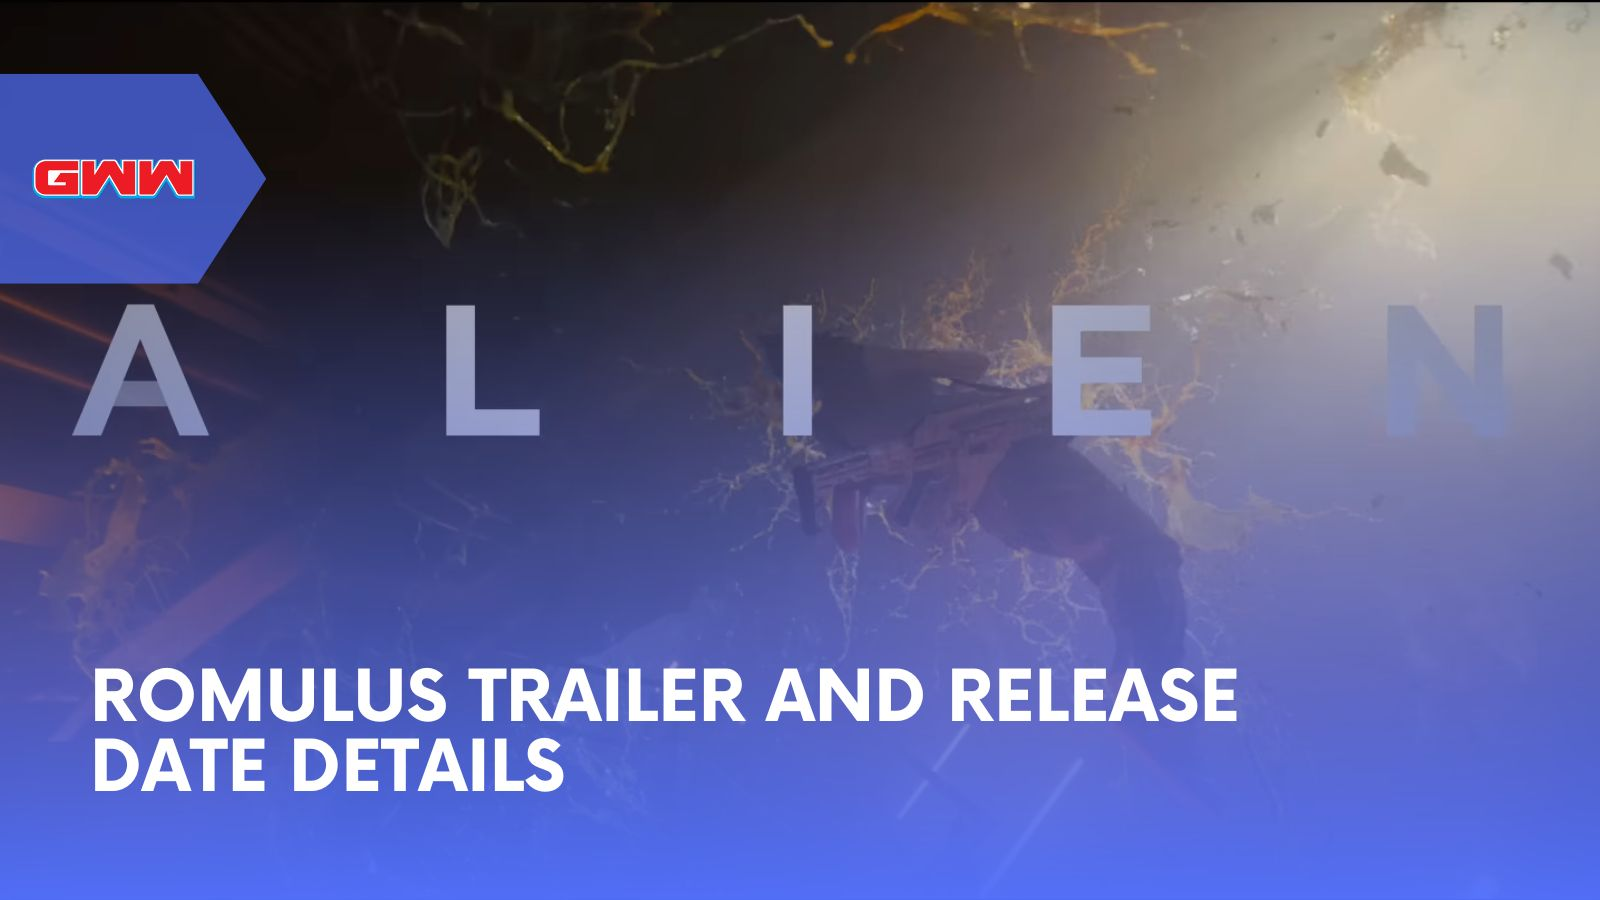 Alien: Romulus Trailer and Release Date Details